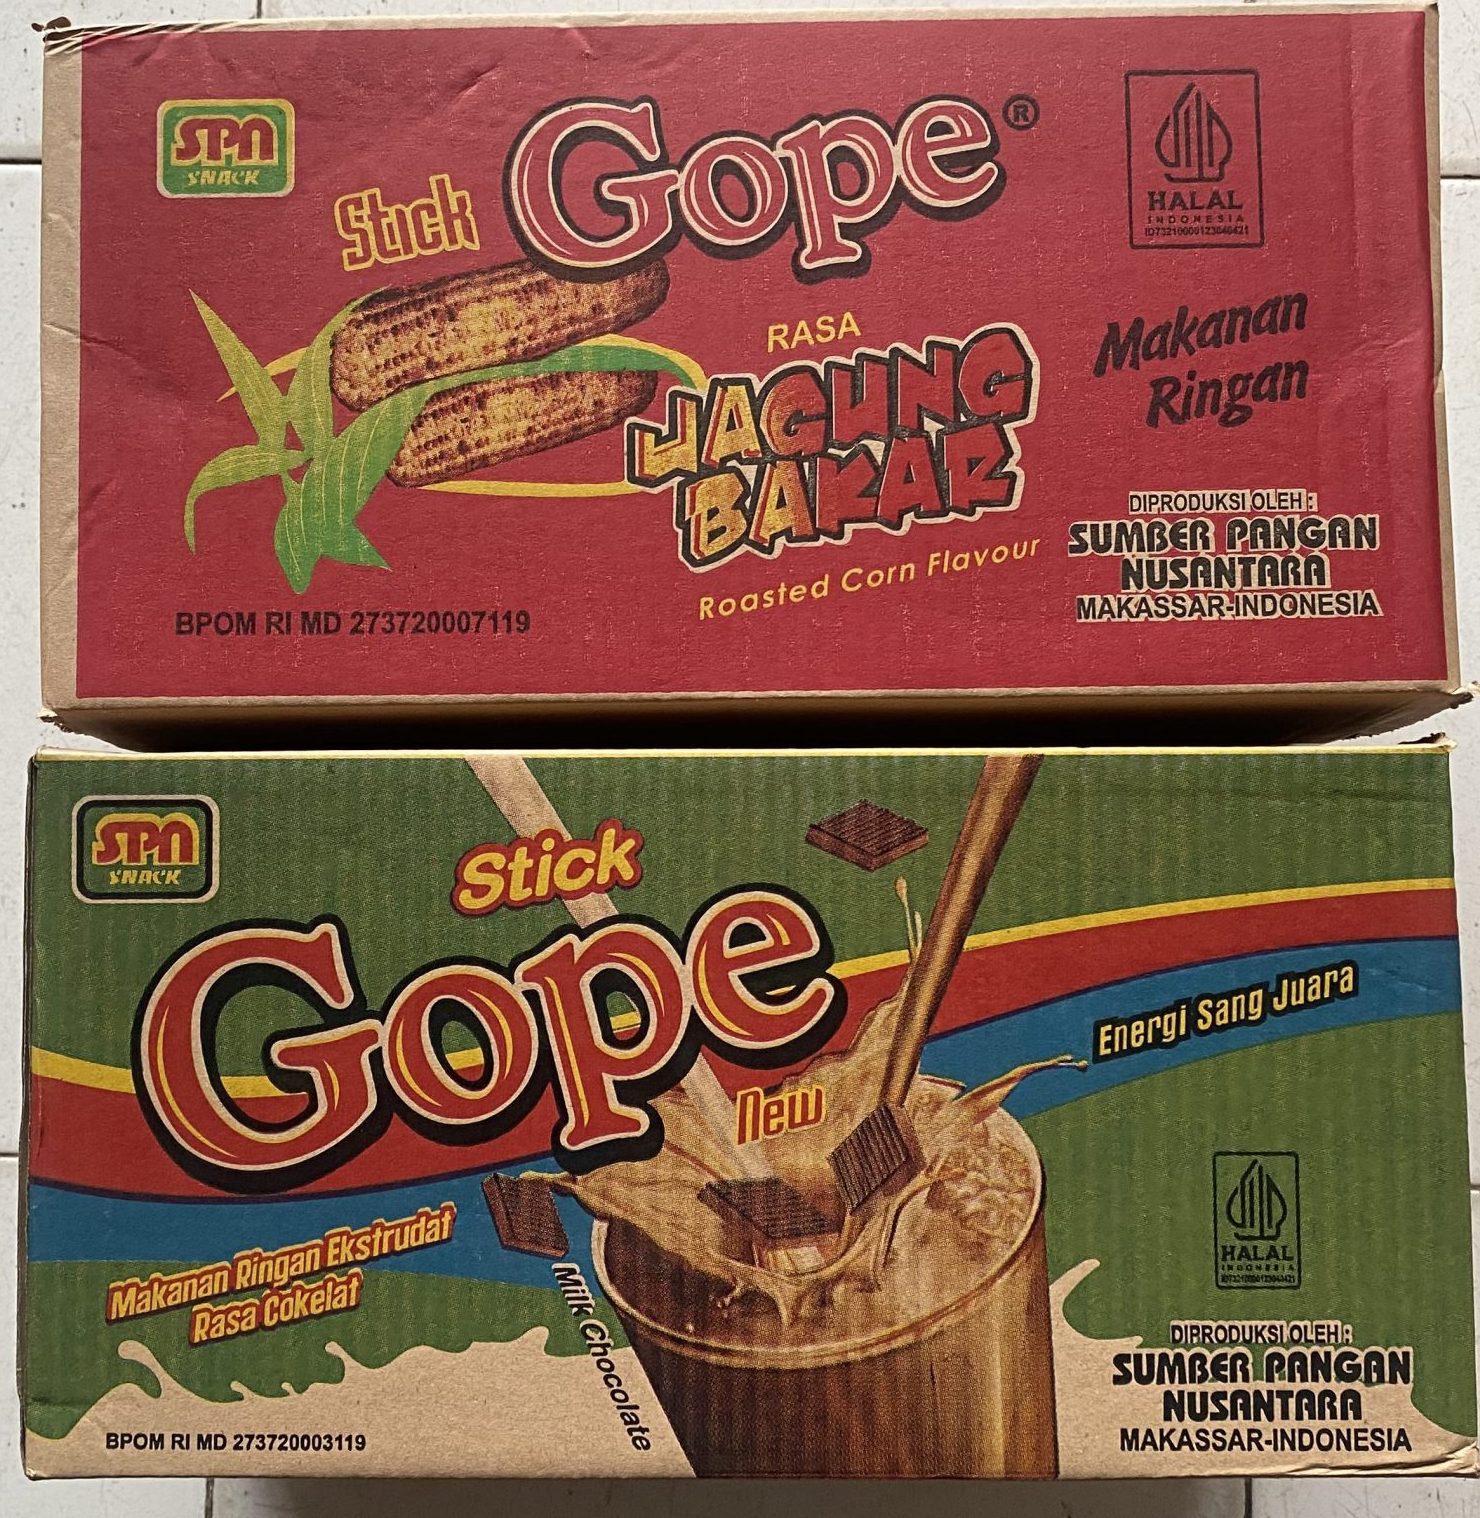 Gope-wafer